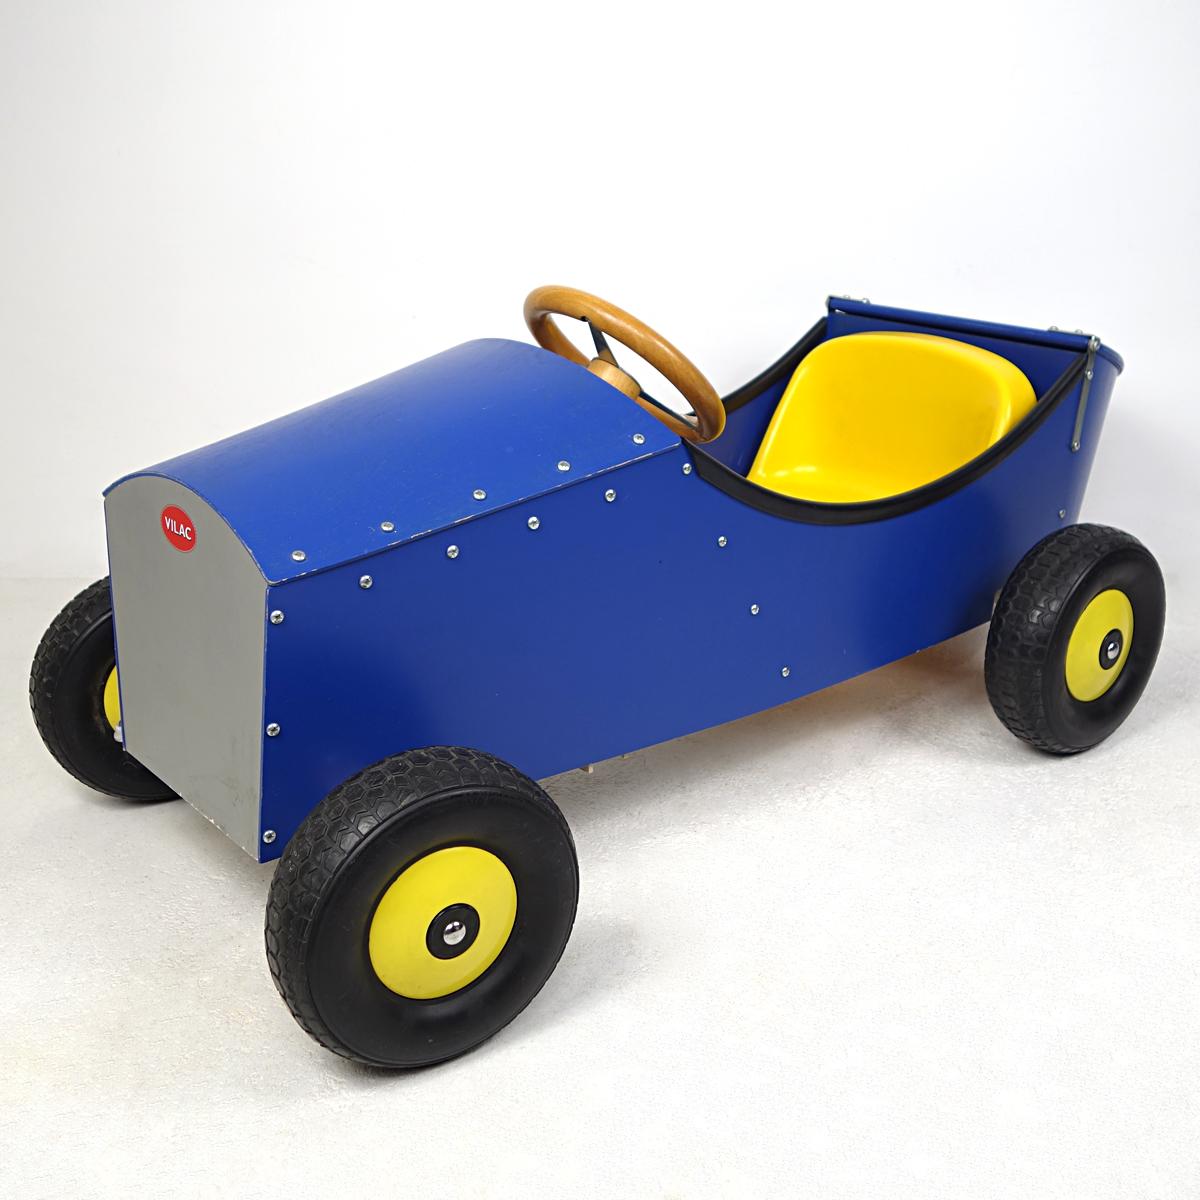 Post-Modern Limited Edition Pedal Car Vilac by Philippe Starck for La Redoute In Good Condition For Sale In Doornspijk, NL